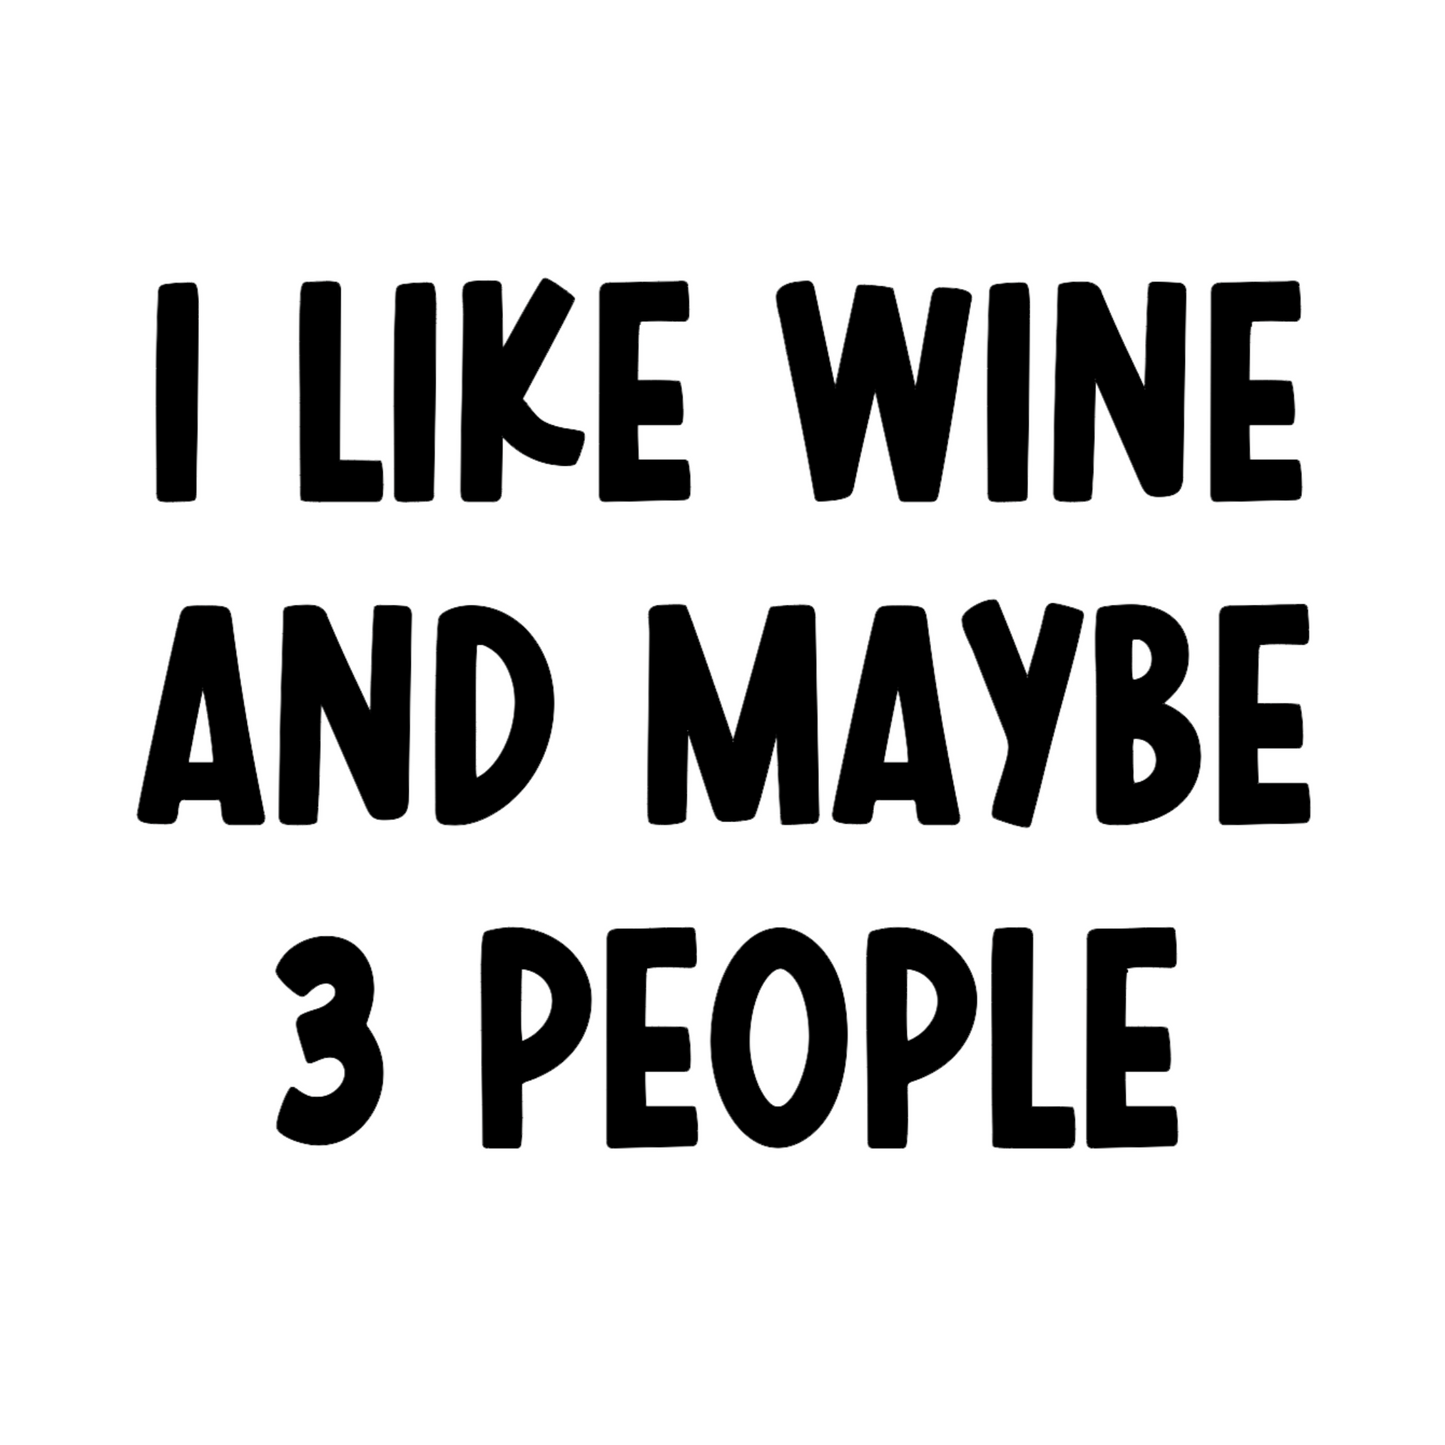 I Like Wine & Maybe 3 People - White T-Shirt in black writing. This is the design in black on white background (design image)